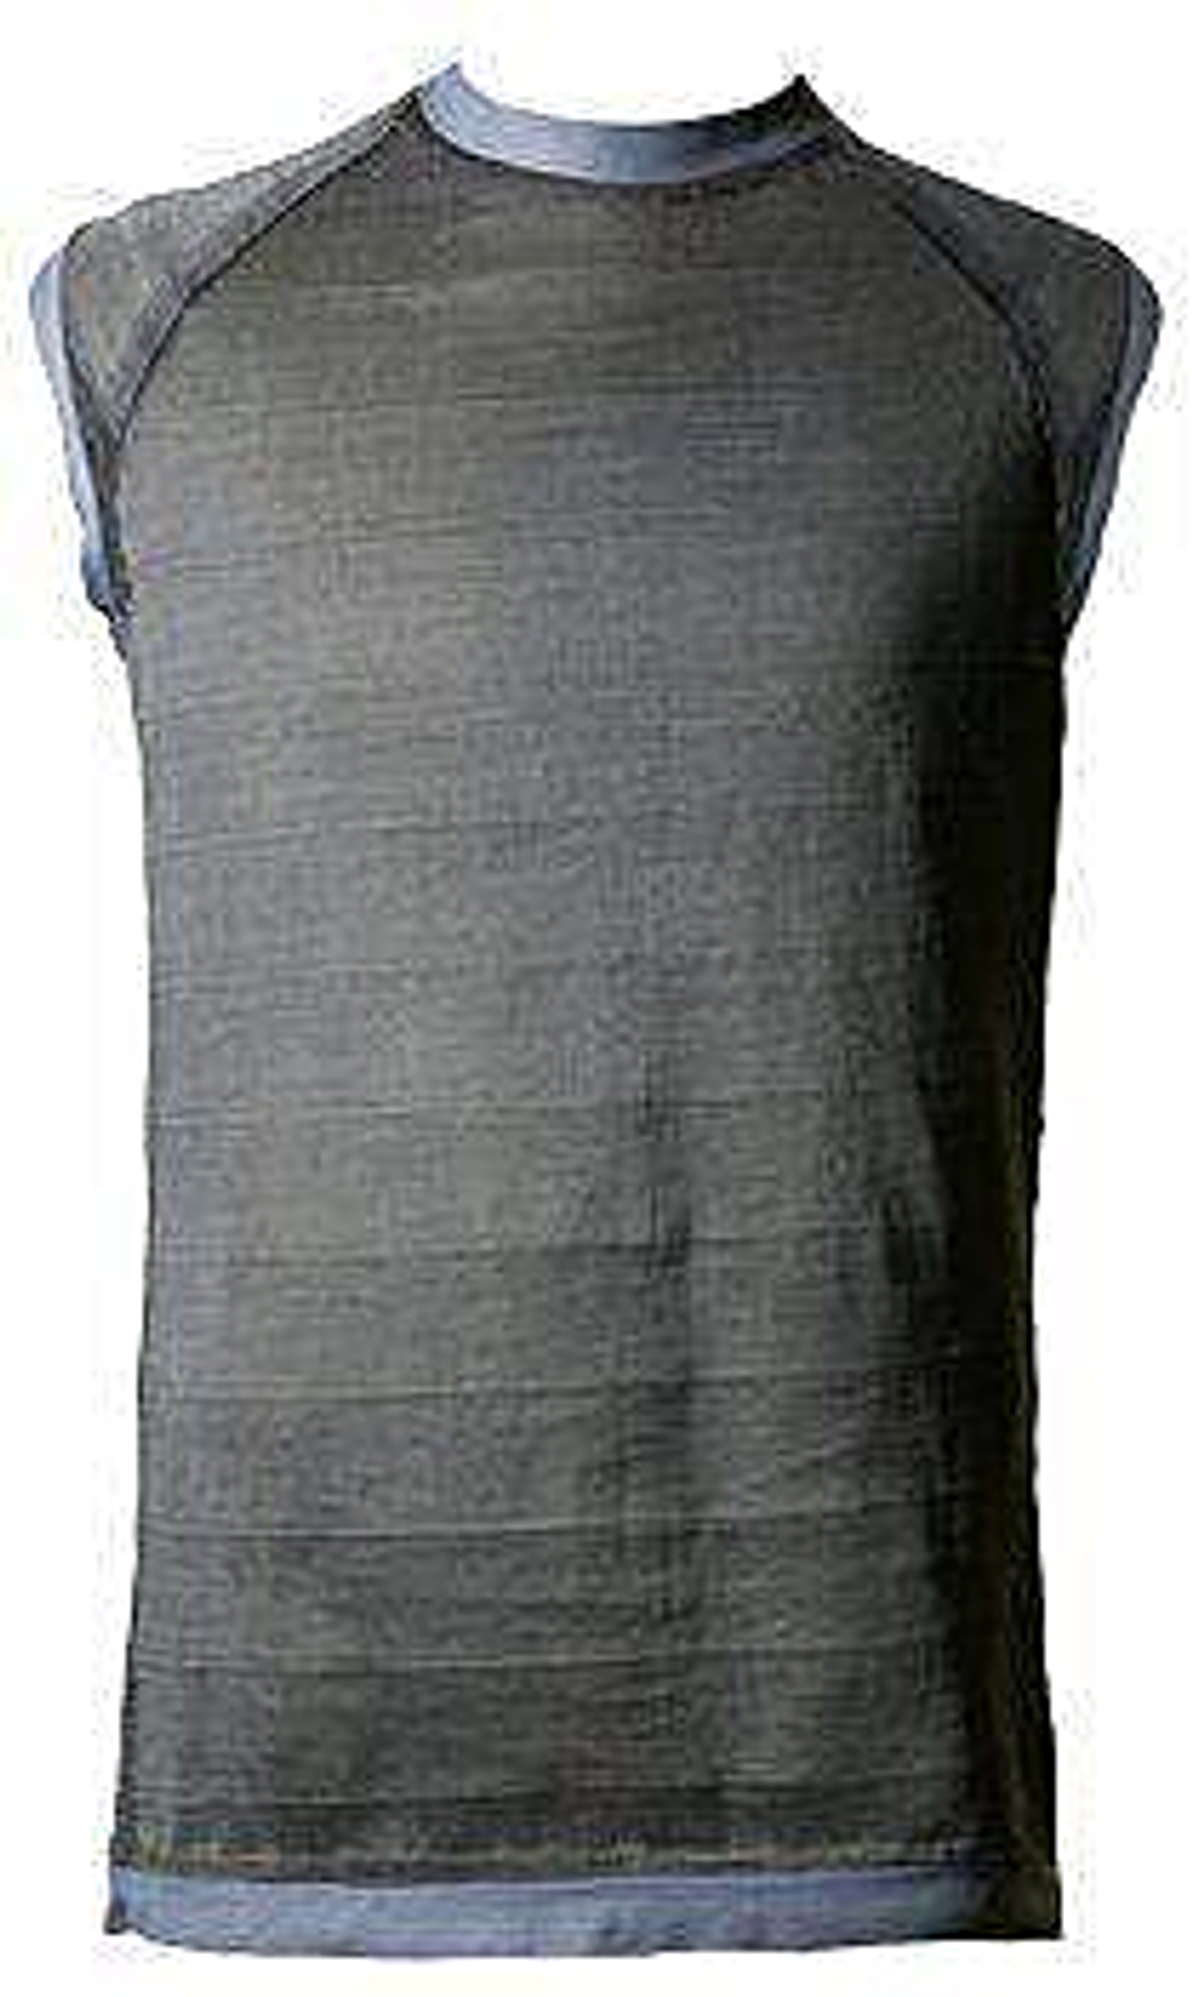 BladeTecT Turtleskin Security Cut Resistant Protective Shirt -Sleeveless - Size XL